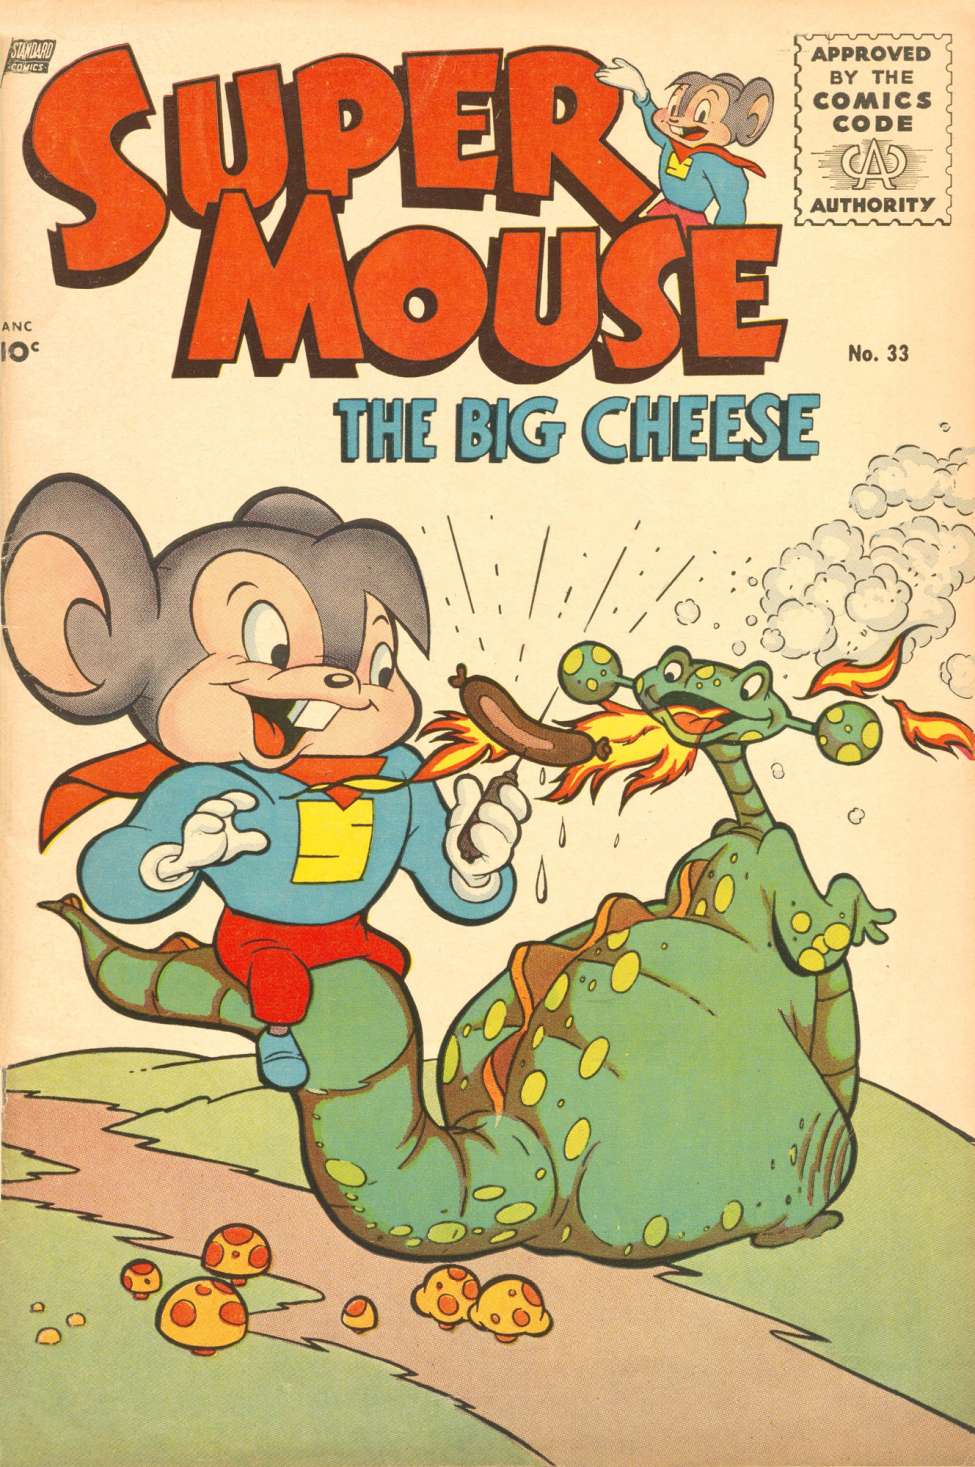 Book Cover For Supermouse 33 - Version 2